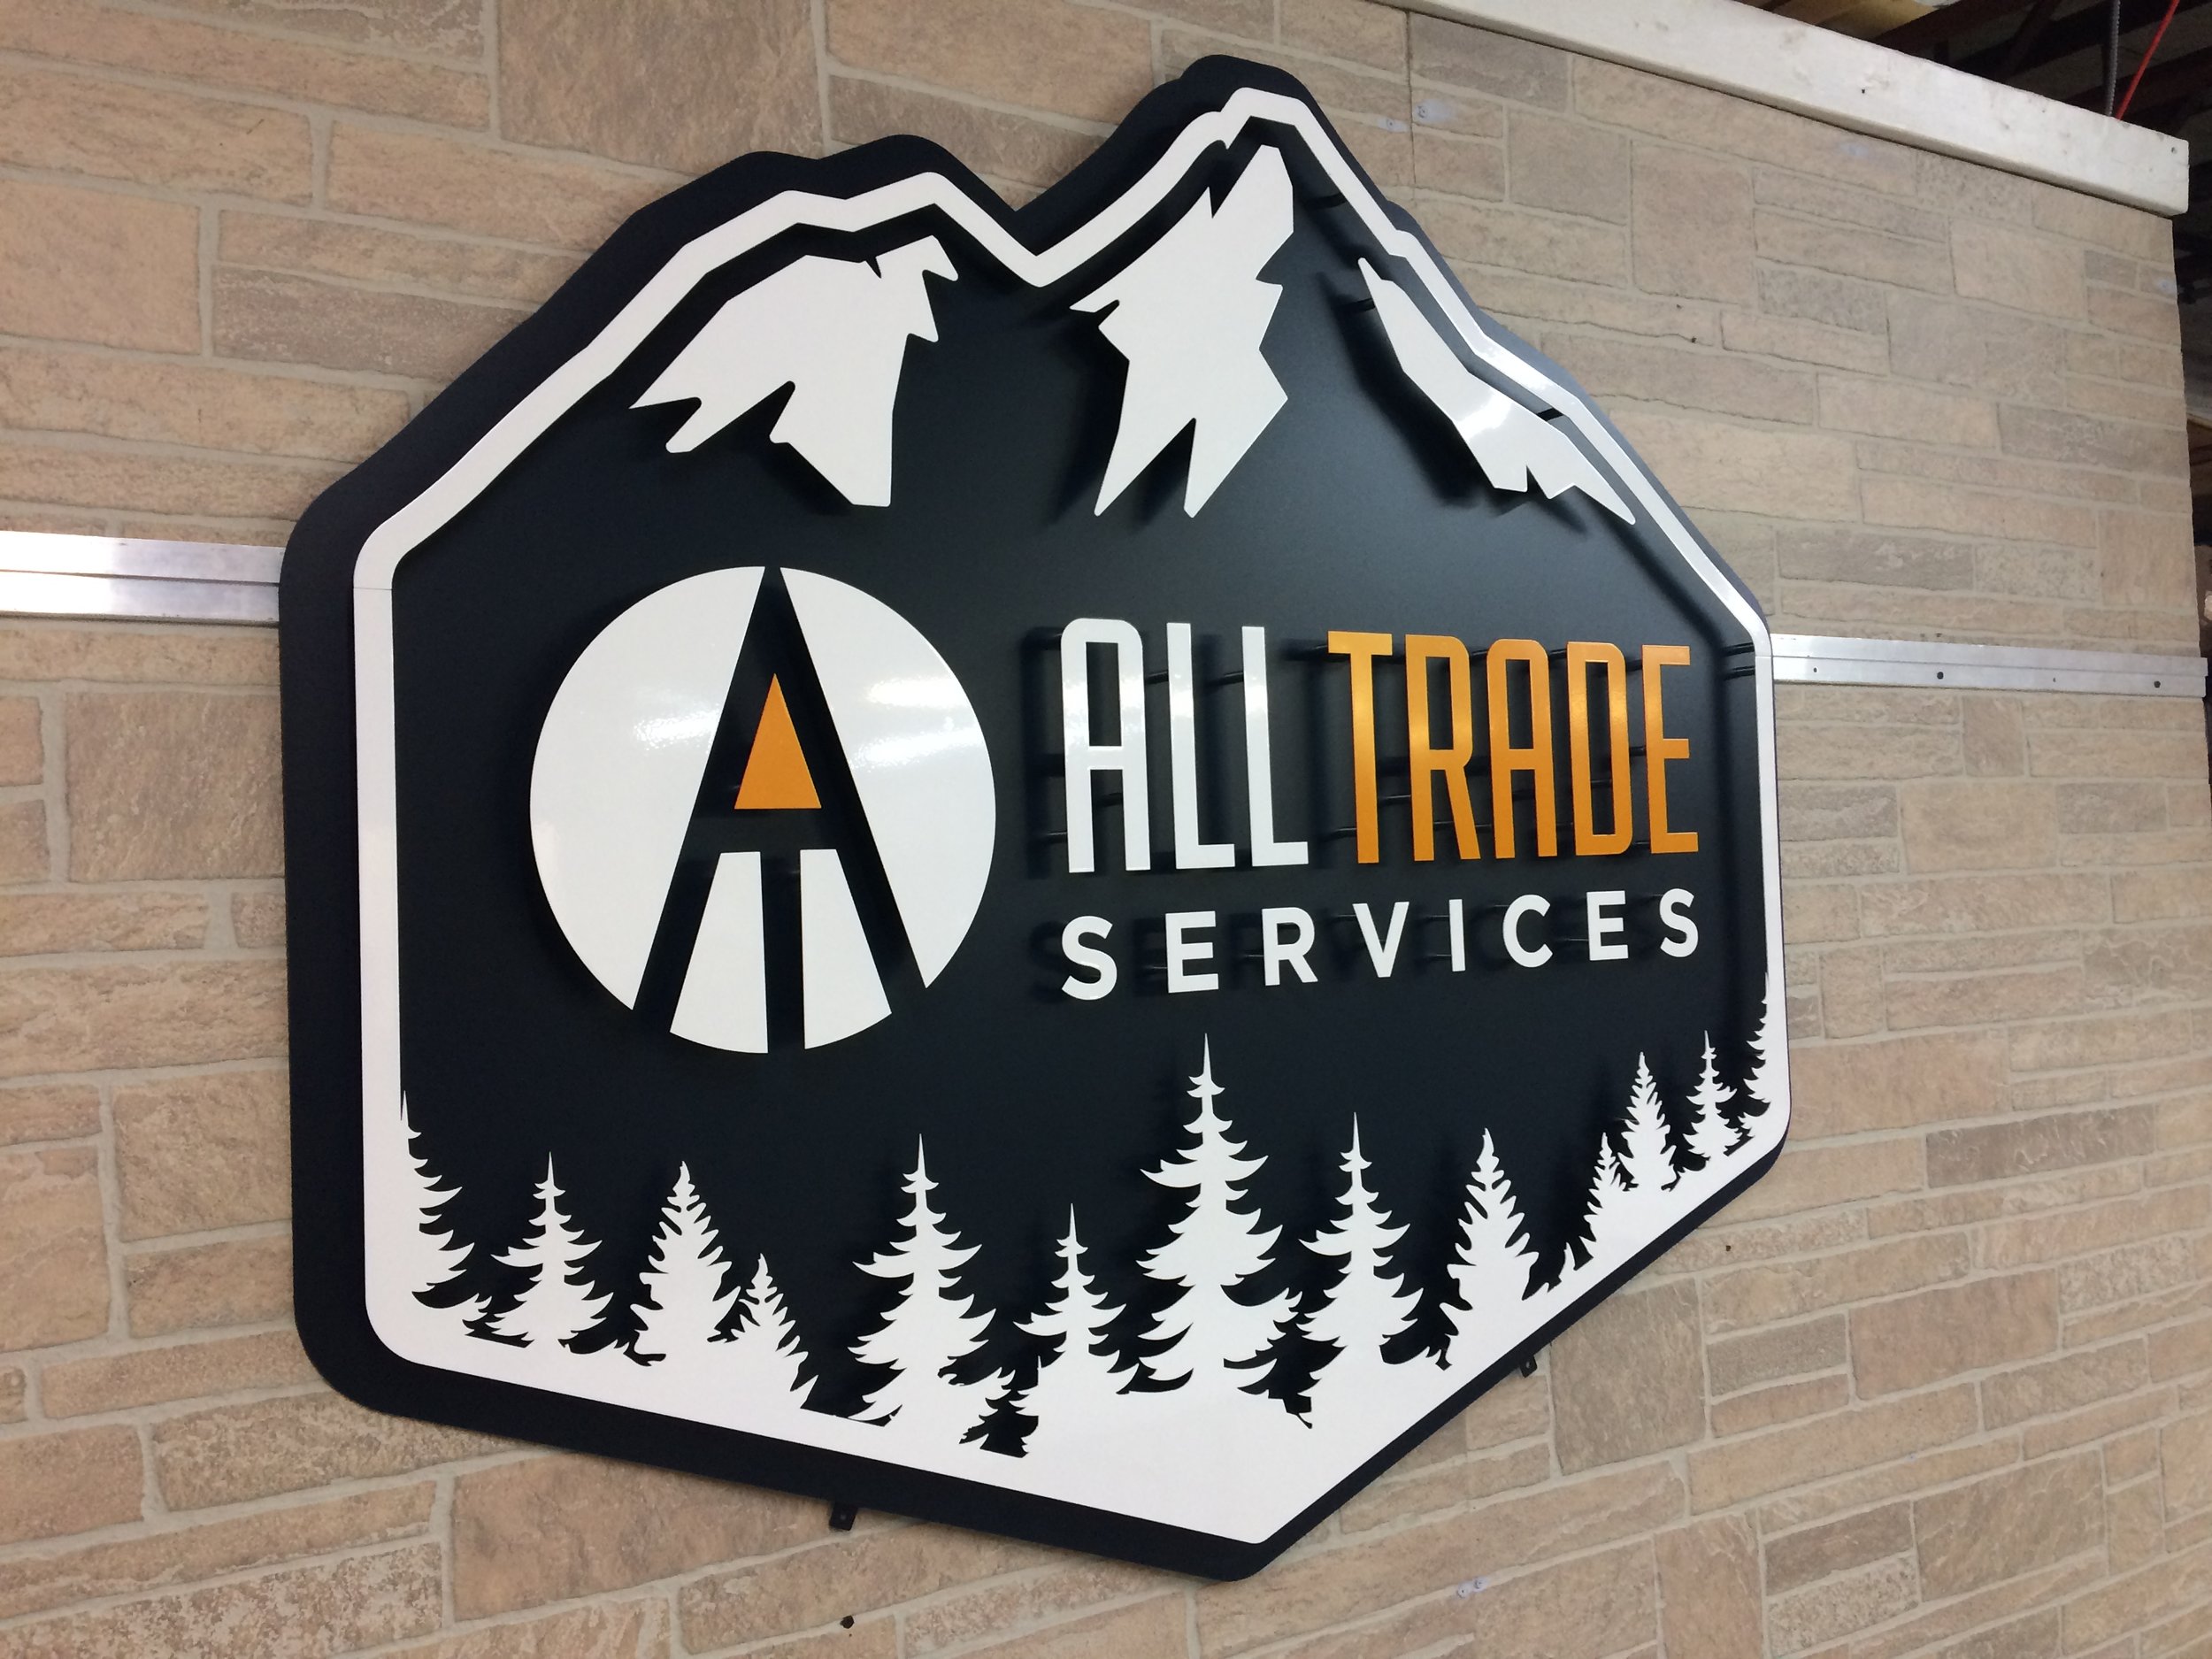 57-All Trade Services.JPG